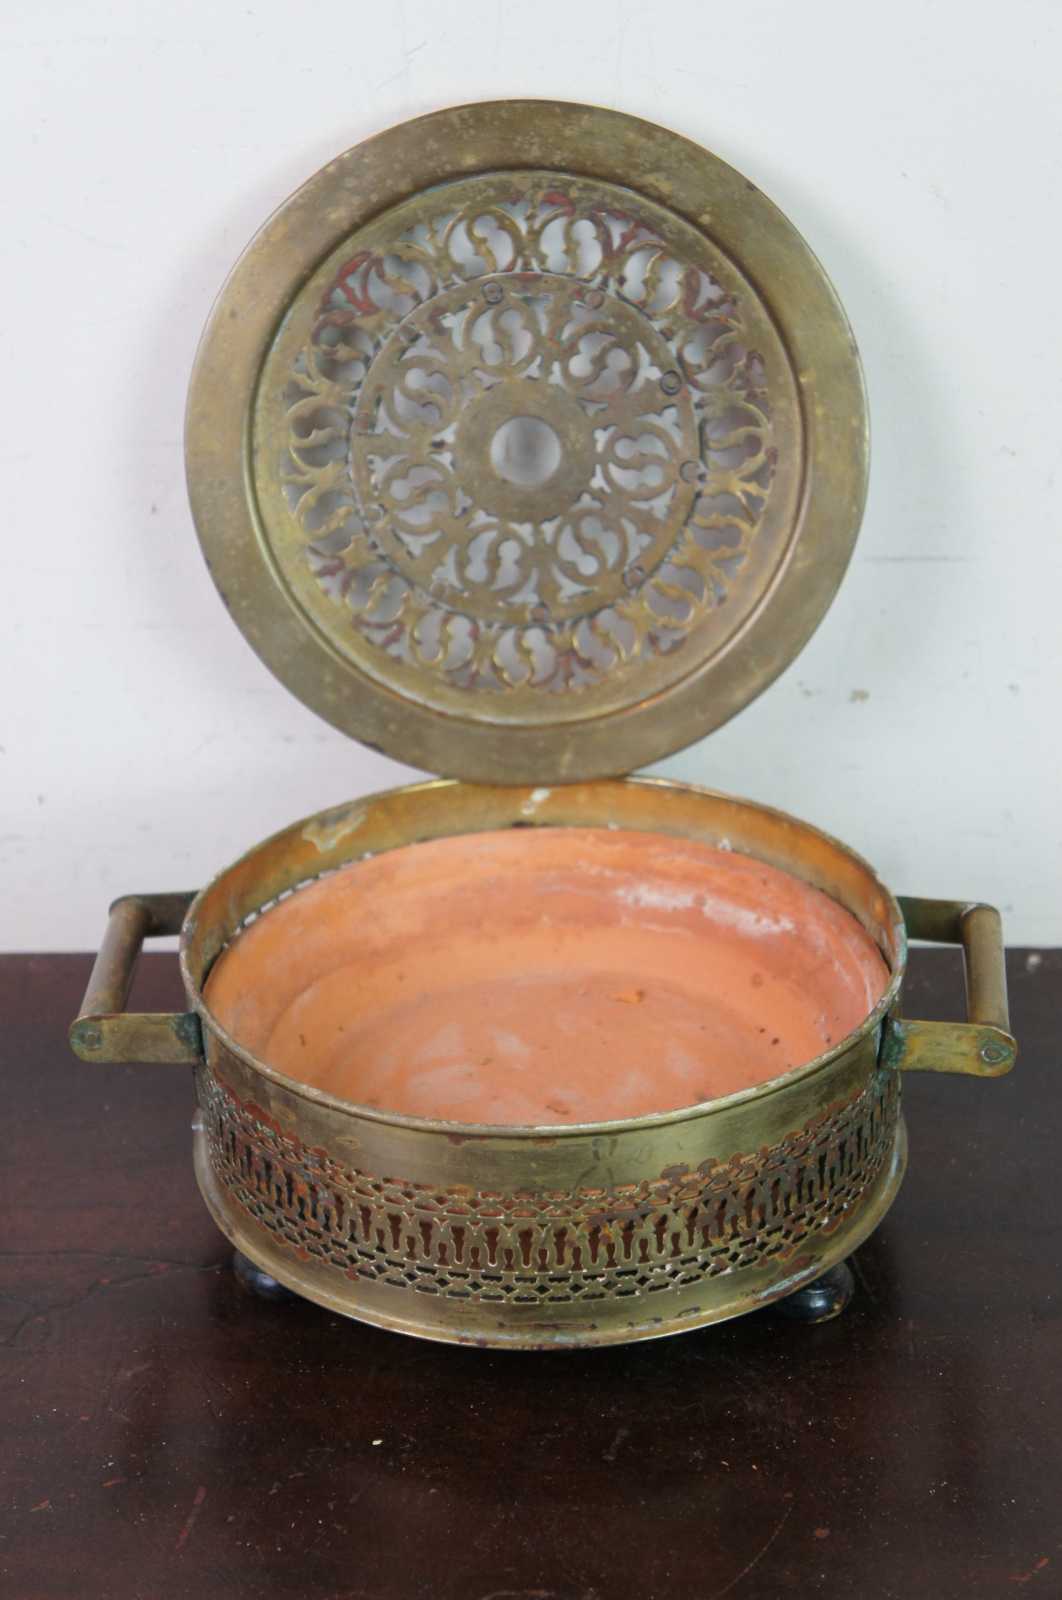 1950s plate warmer/burner from a French restaurant – Chez Pluie